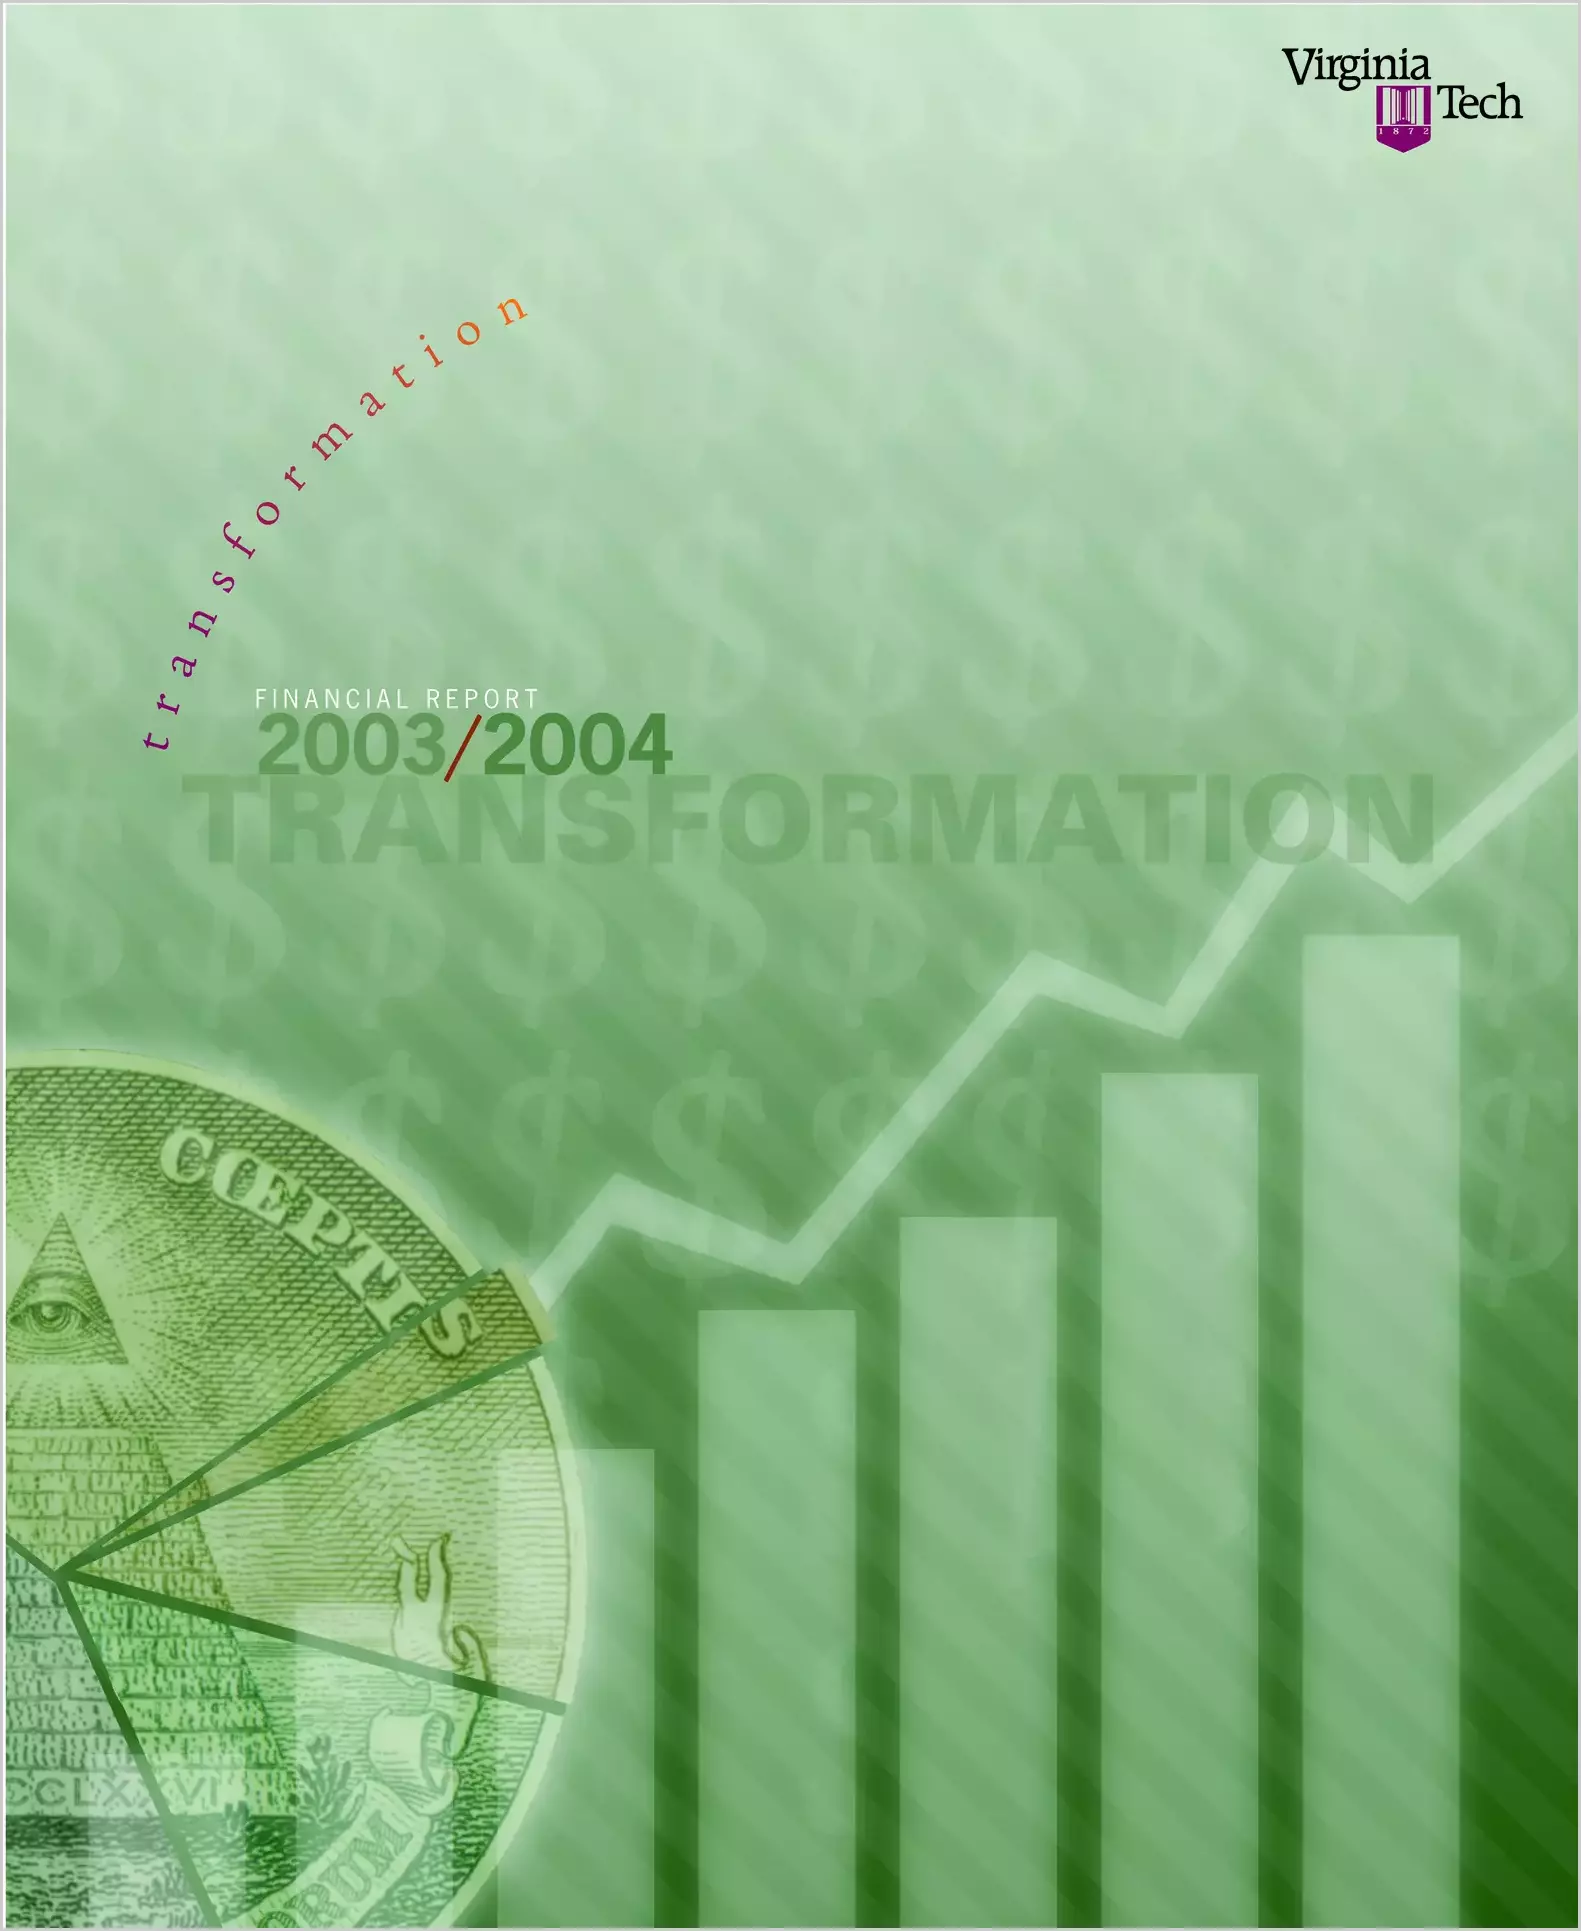 Virginia Polytechnic Institute and State University - Financial Report 2004